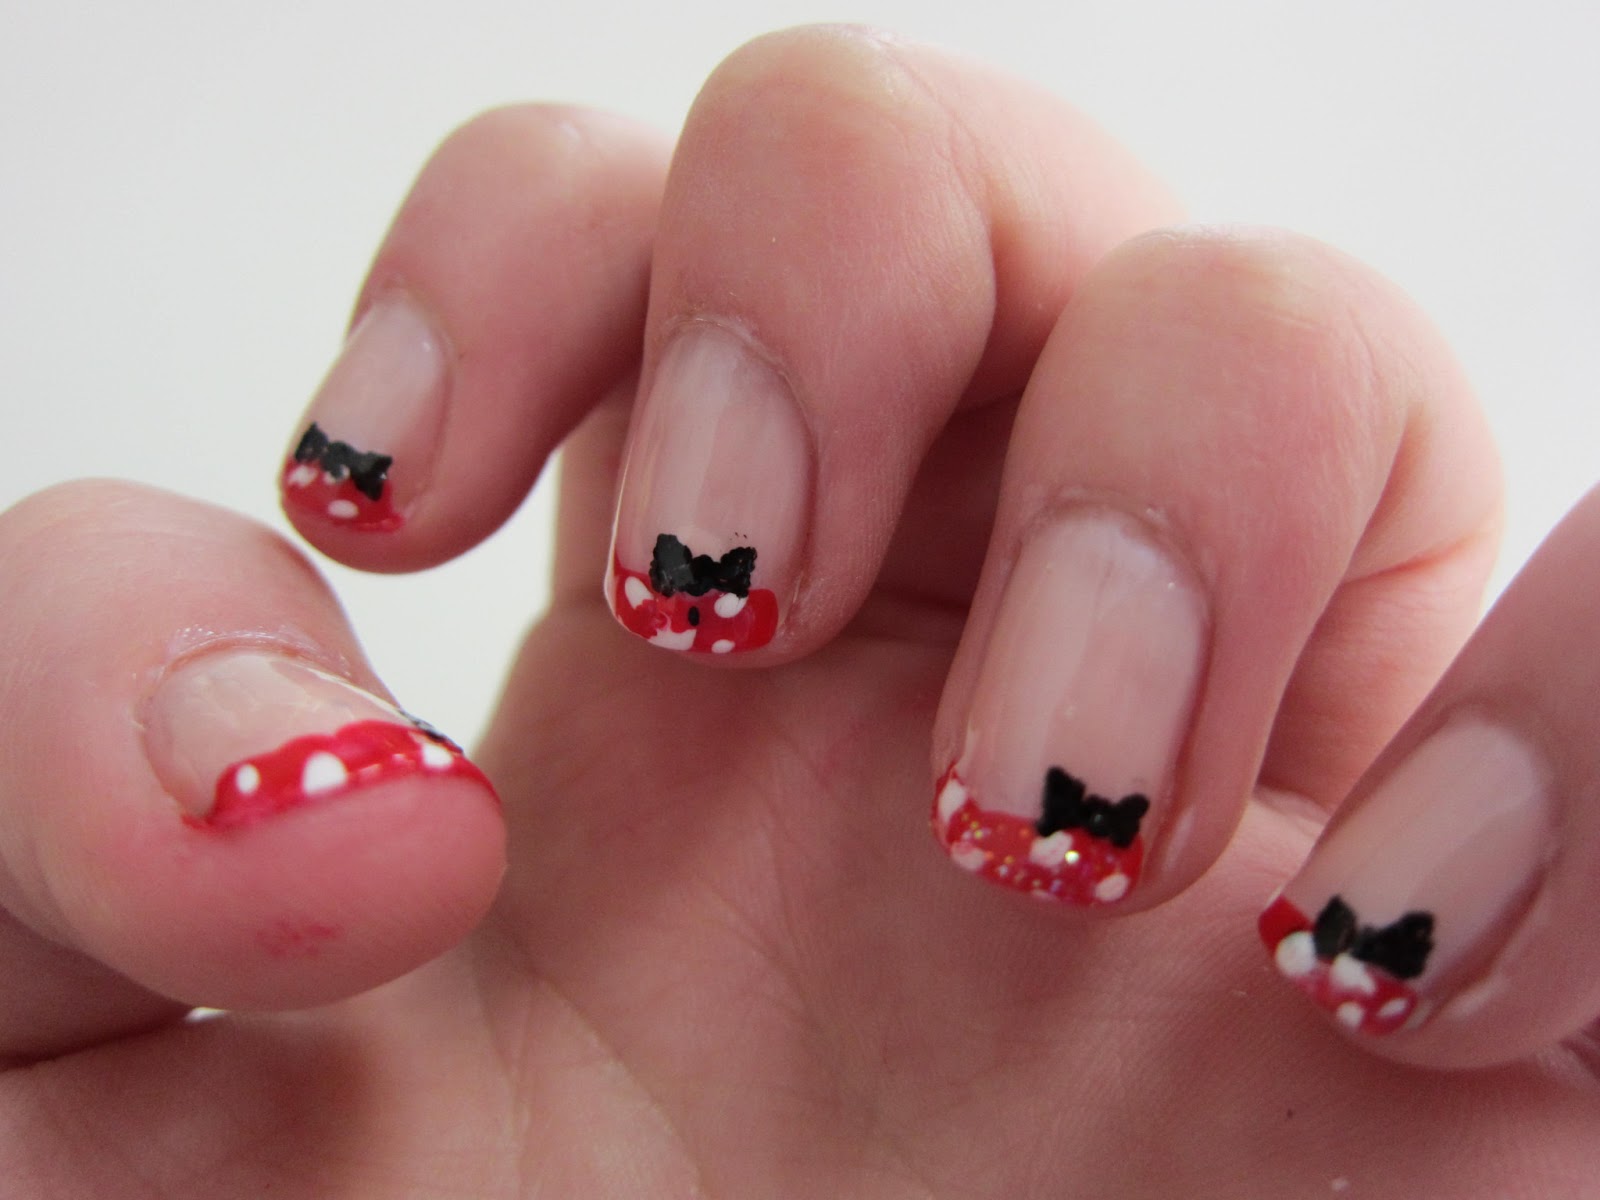 3. Cute Minnie Mouse Nail Art Ideas for Short Nails - wide 10